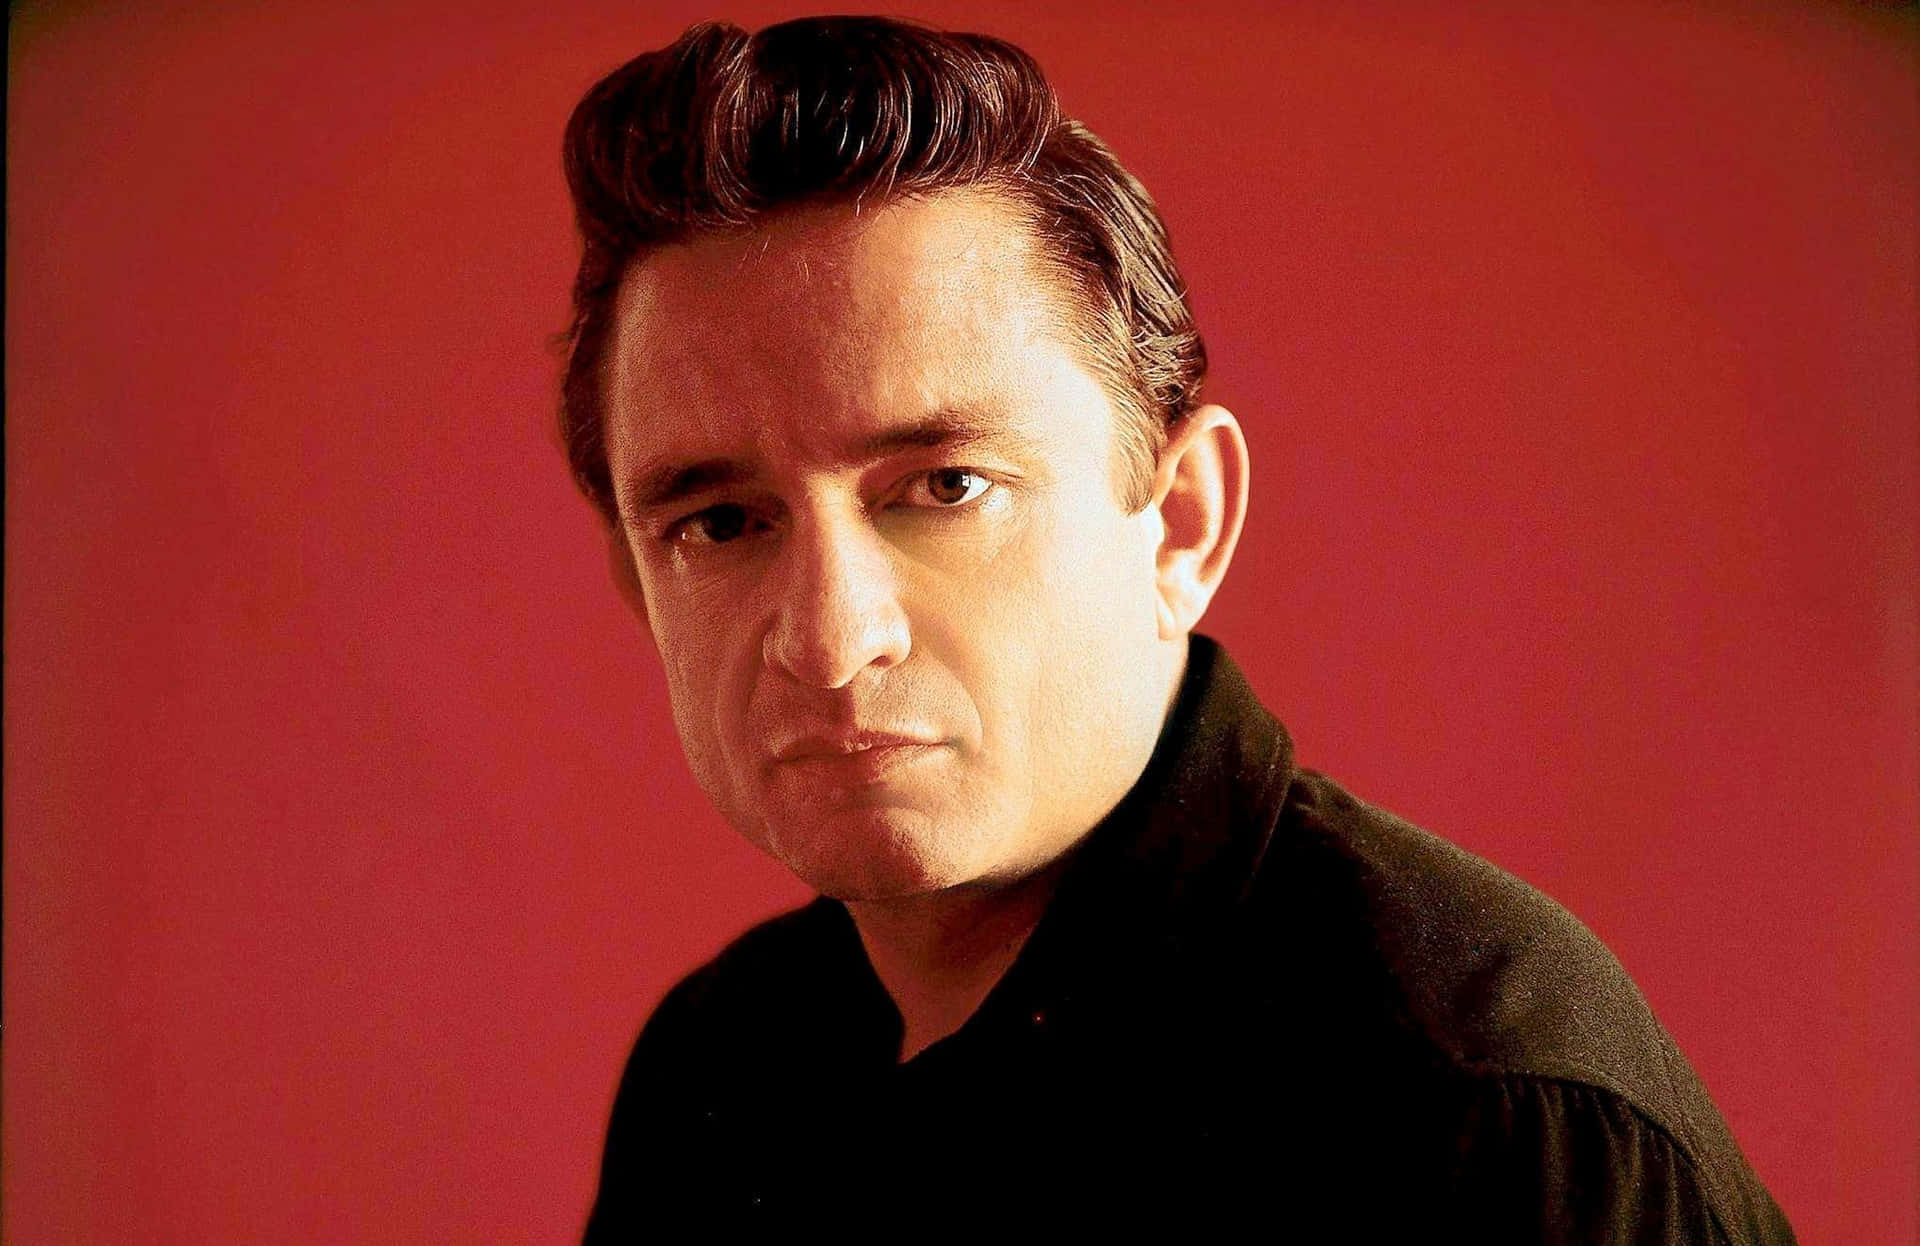 Johnny Cash in his Famous Black Outfit